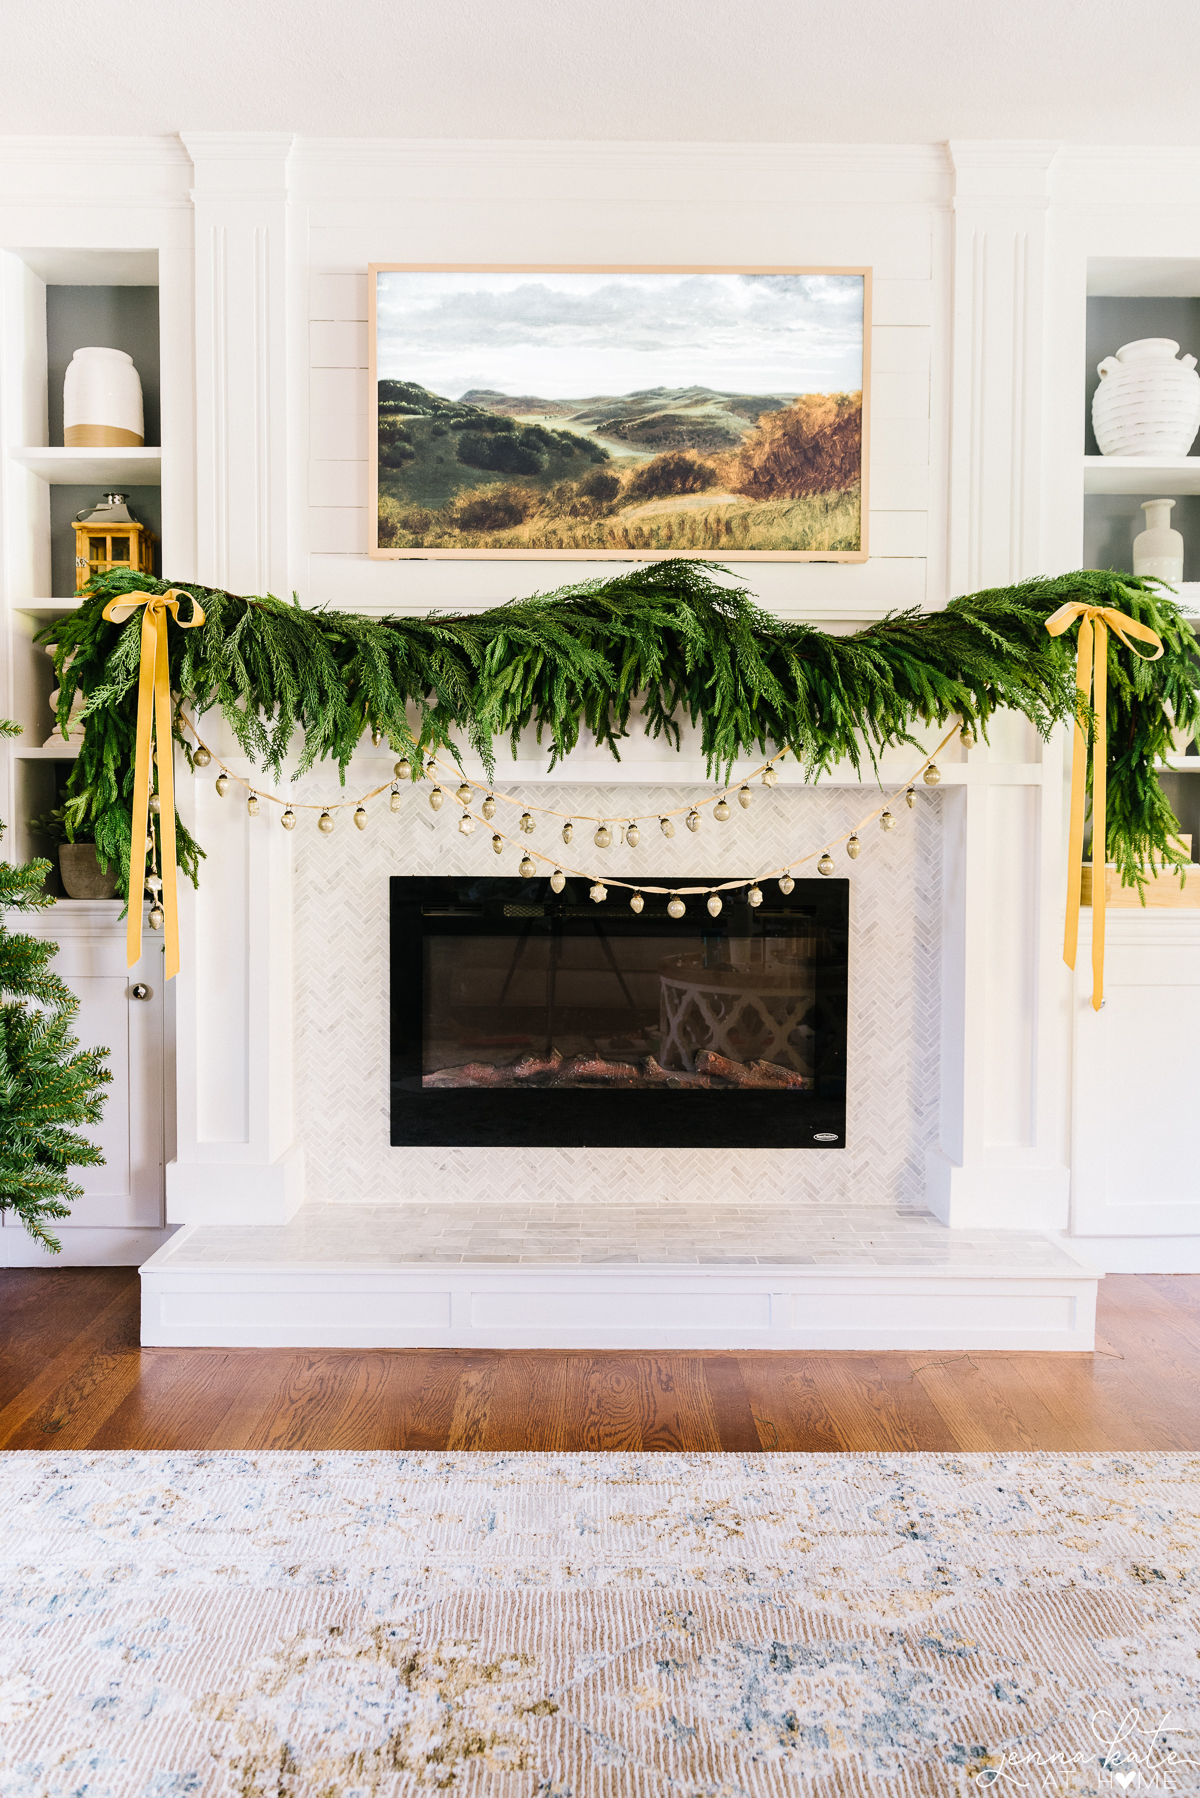 How to Hang Garland on a Mantel